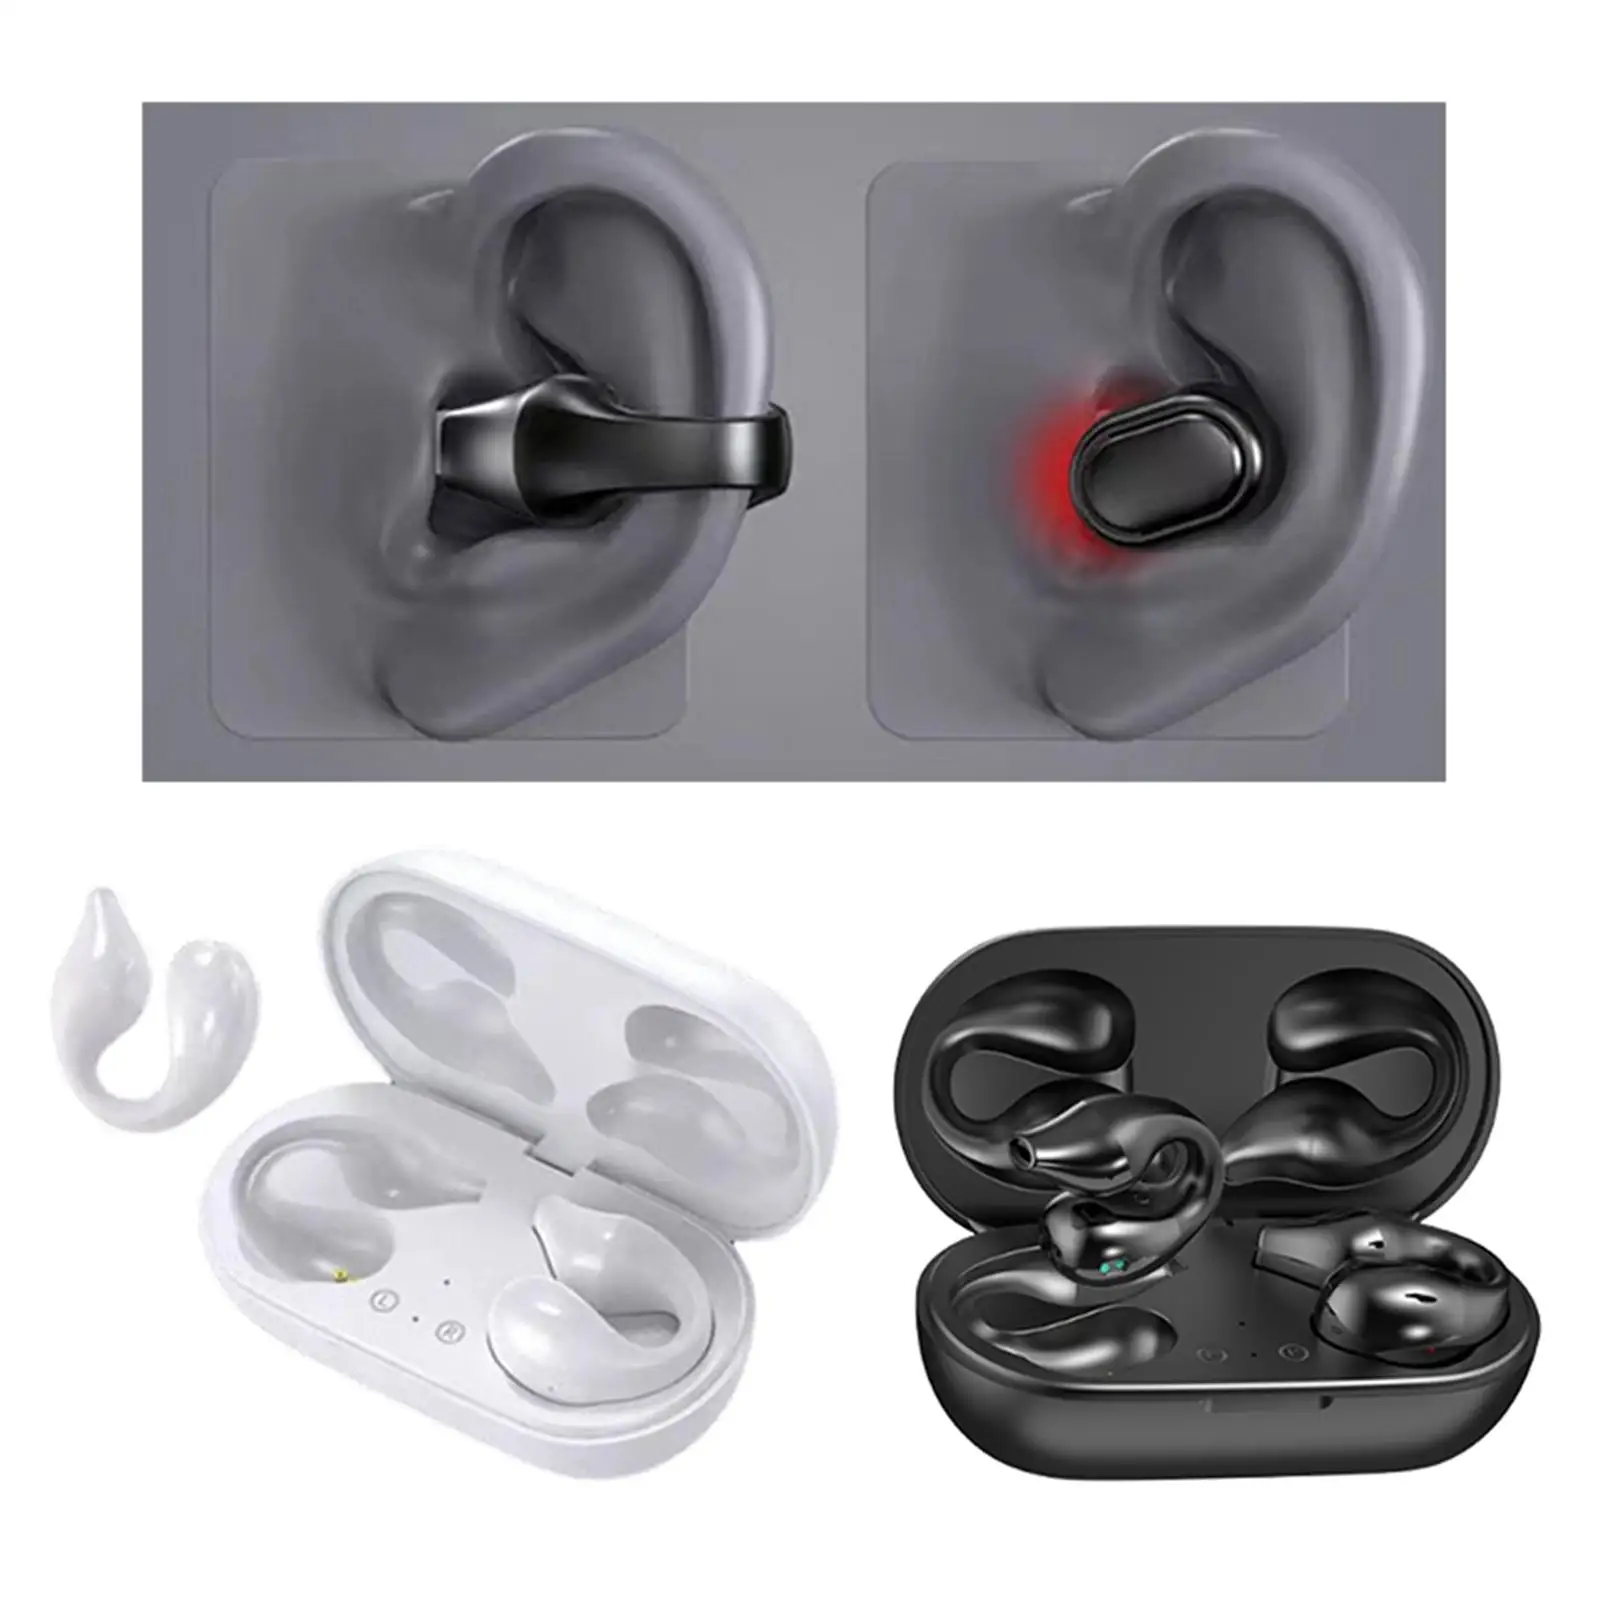 Air Conduction Headphones Sports Earphones BT 5.2 Over Ear Waterproof Wireless Earbuds for Games Fitness Workout Jogging Yoga